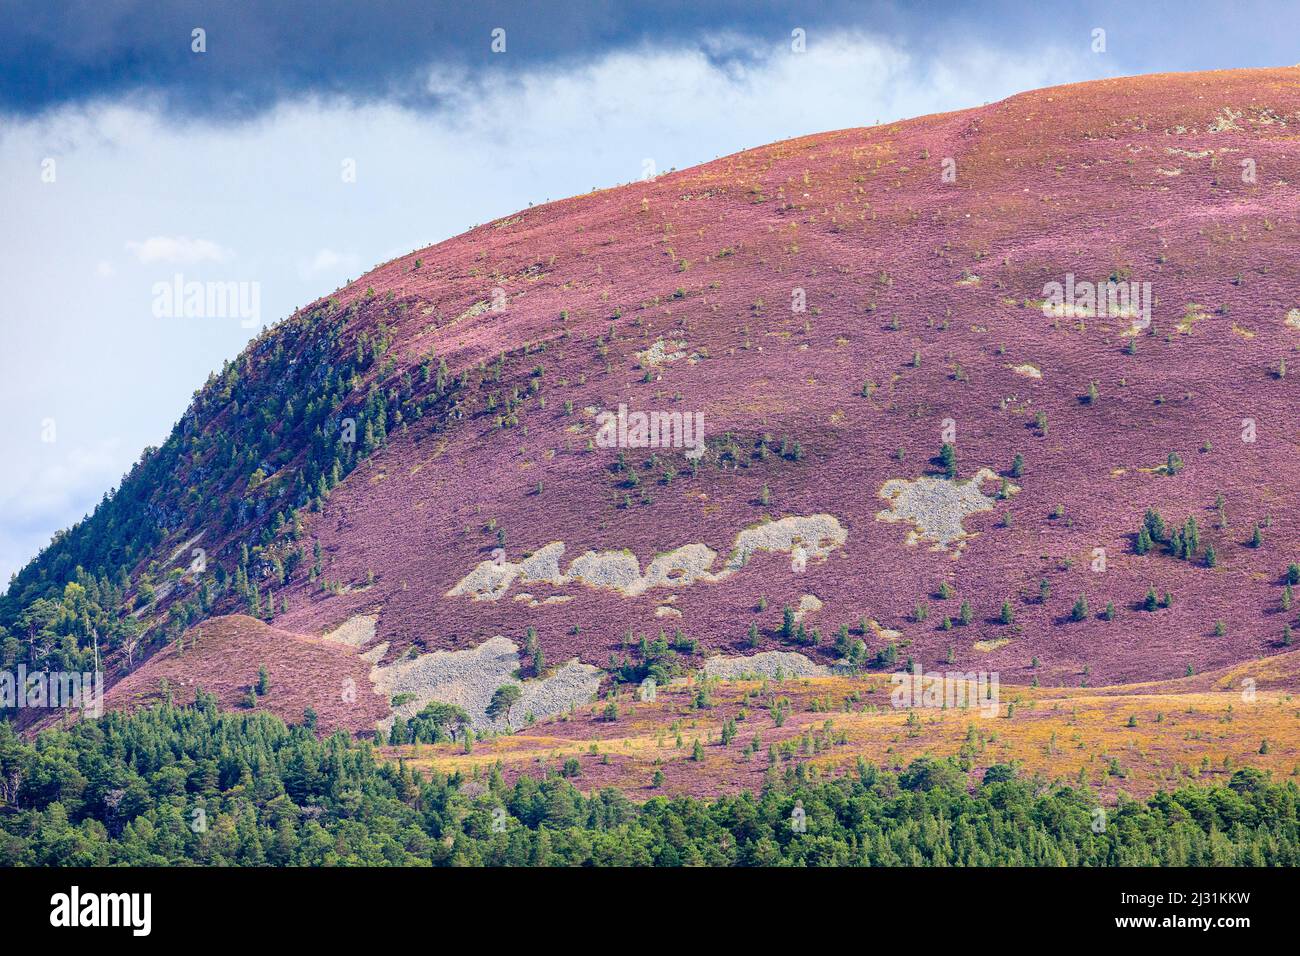 Cairngorms footpath in summer with heather in bloom, bright purple, pink, flowering heather, Highlands, Scotland, UK Stock Photo